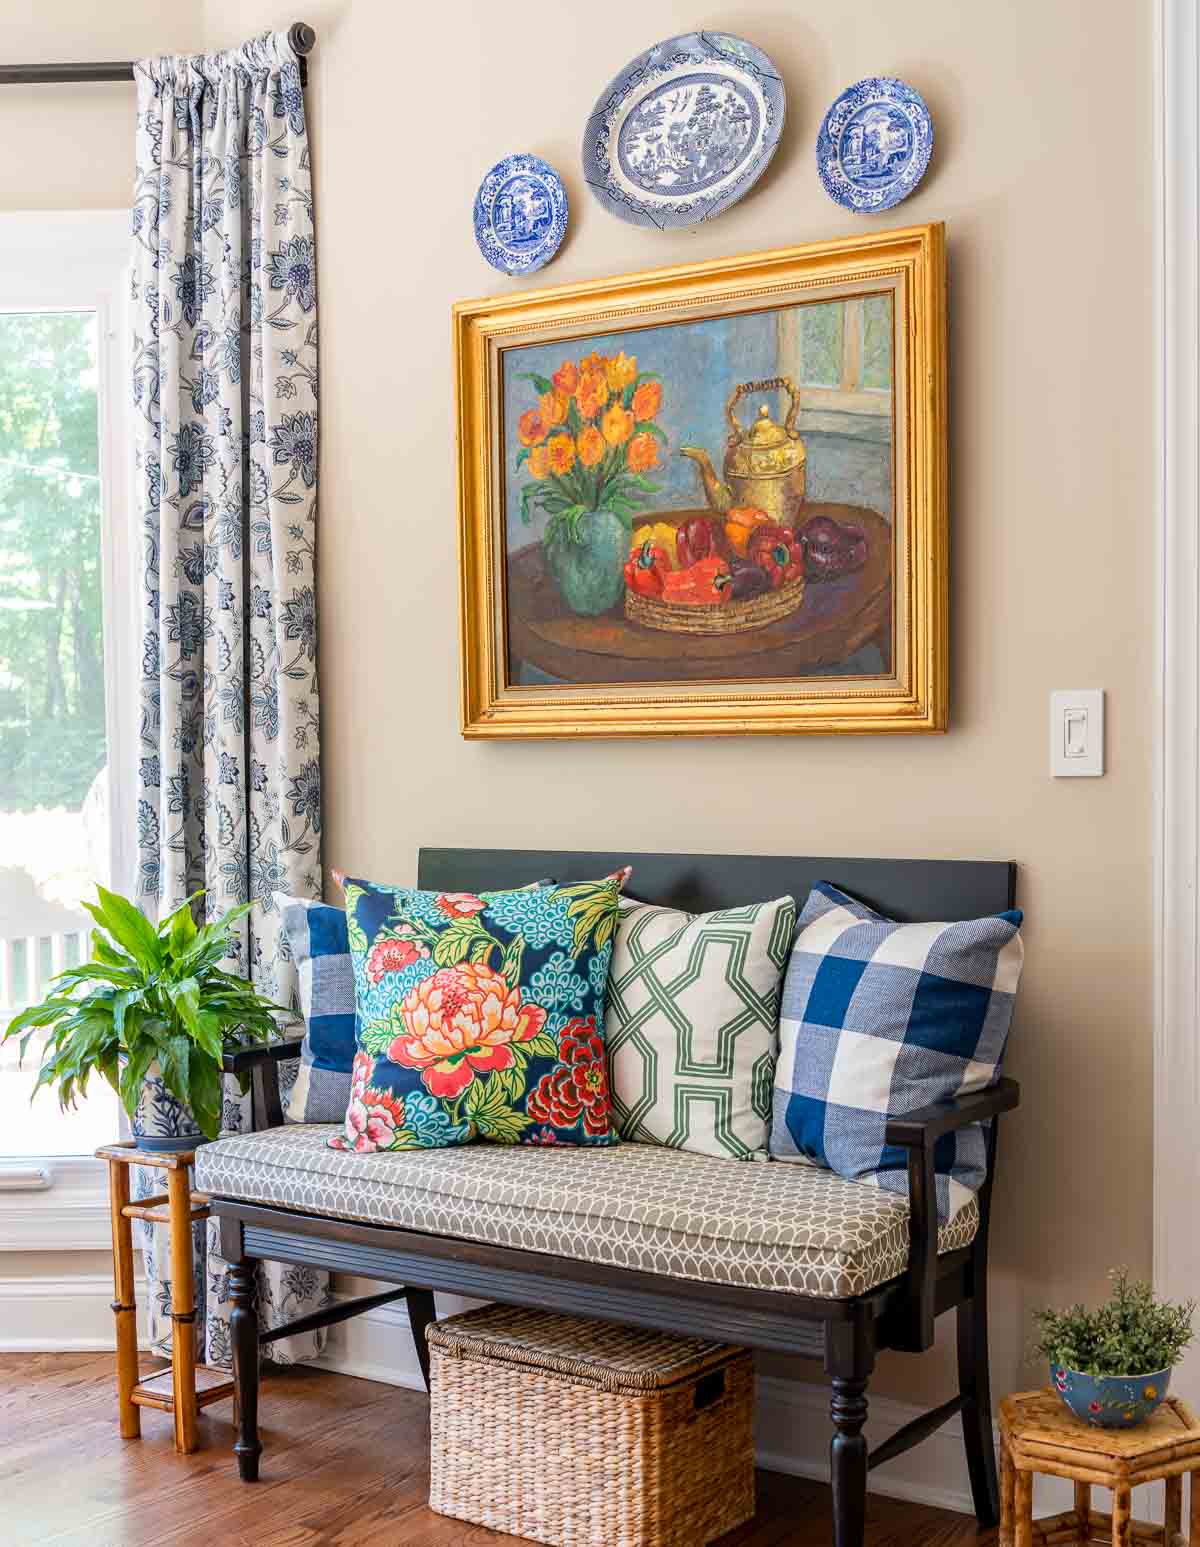 black bench with colorful summer pillows below an original oil painting